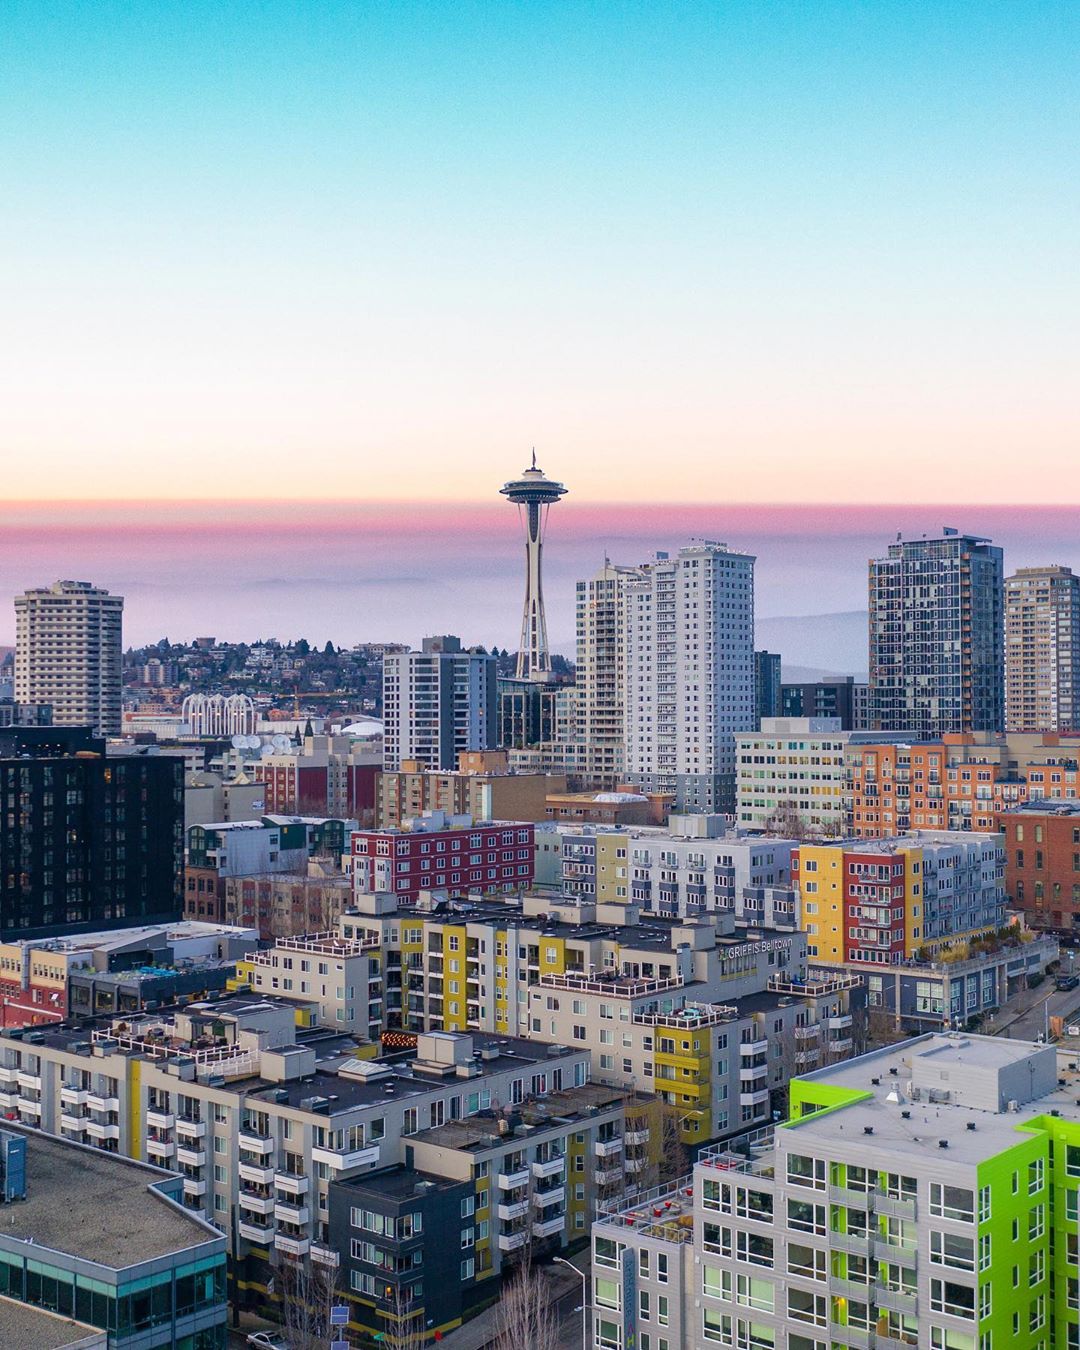 Skyline of Downtown Seattle with Space Needle in view at Dusk. Photo by Instagram user @codycm